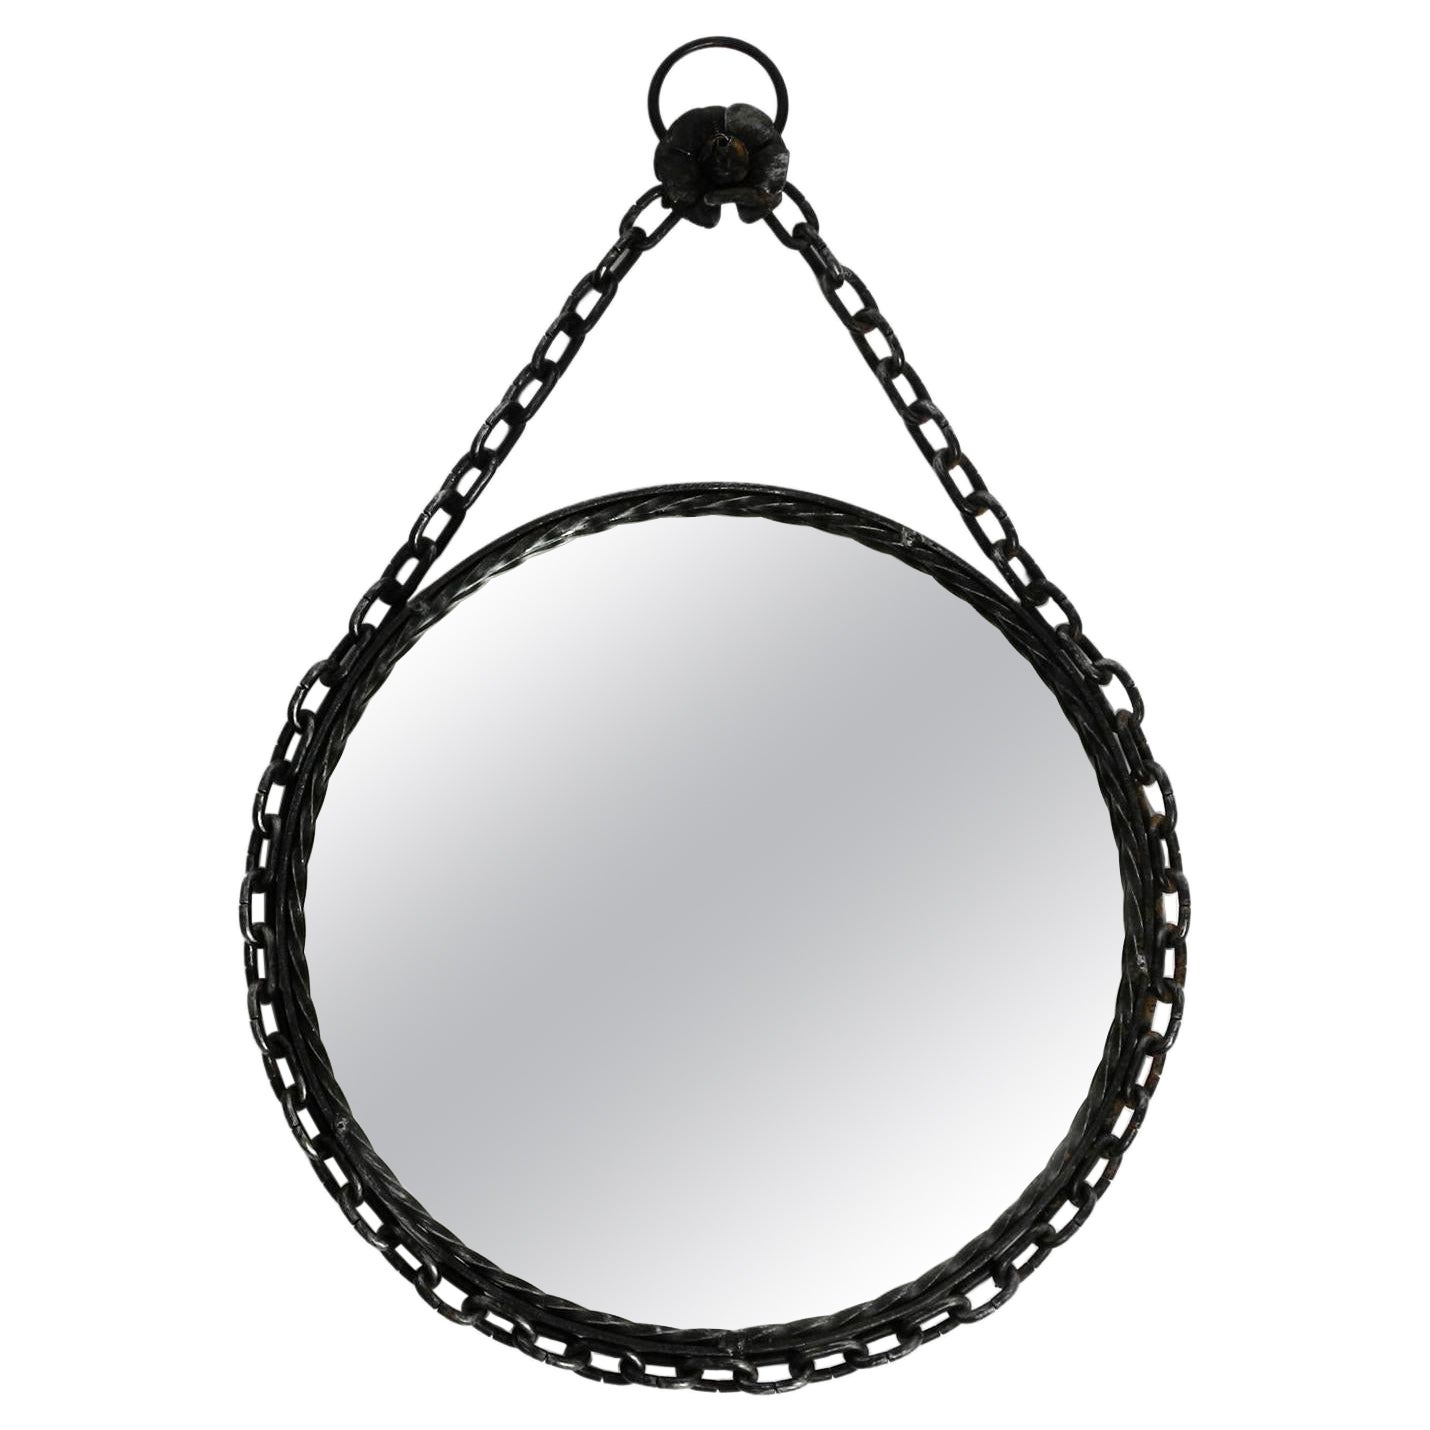 Heavy Brutalist Mid-Century Design Wall Mirror with Wrought Iron Frame and Chain For Sale